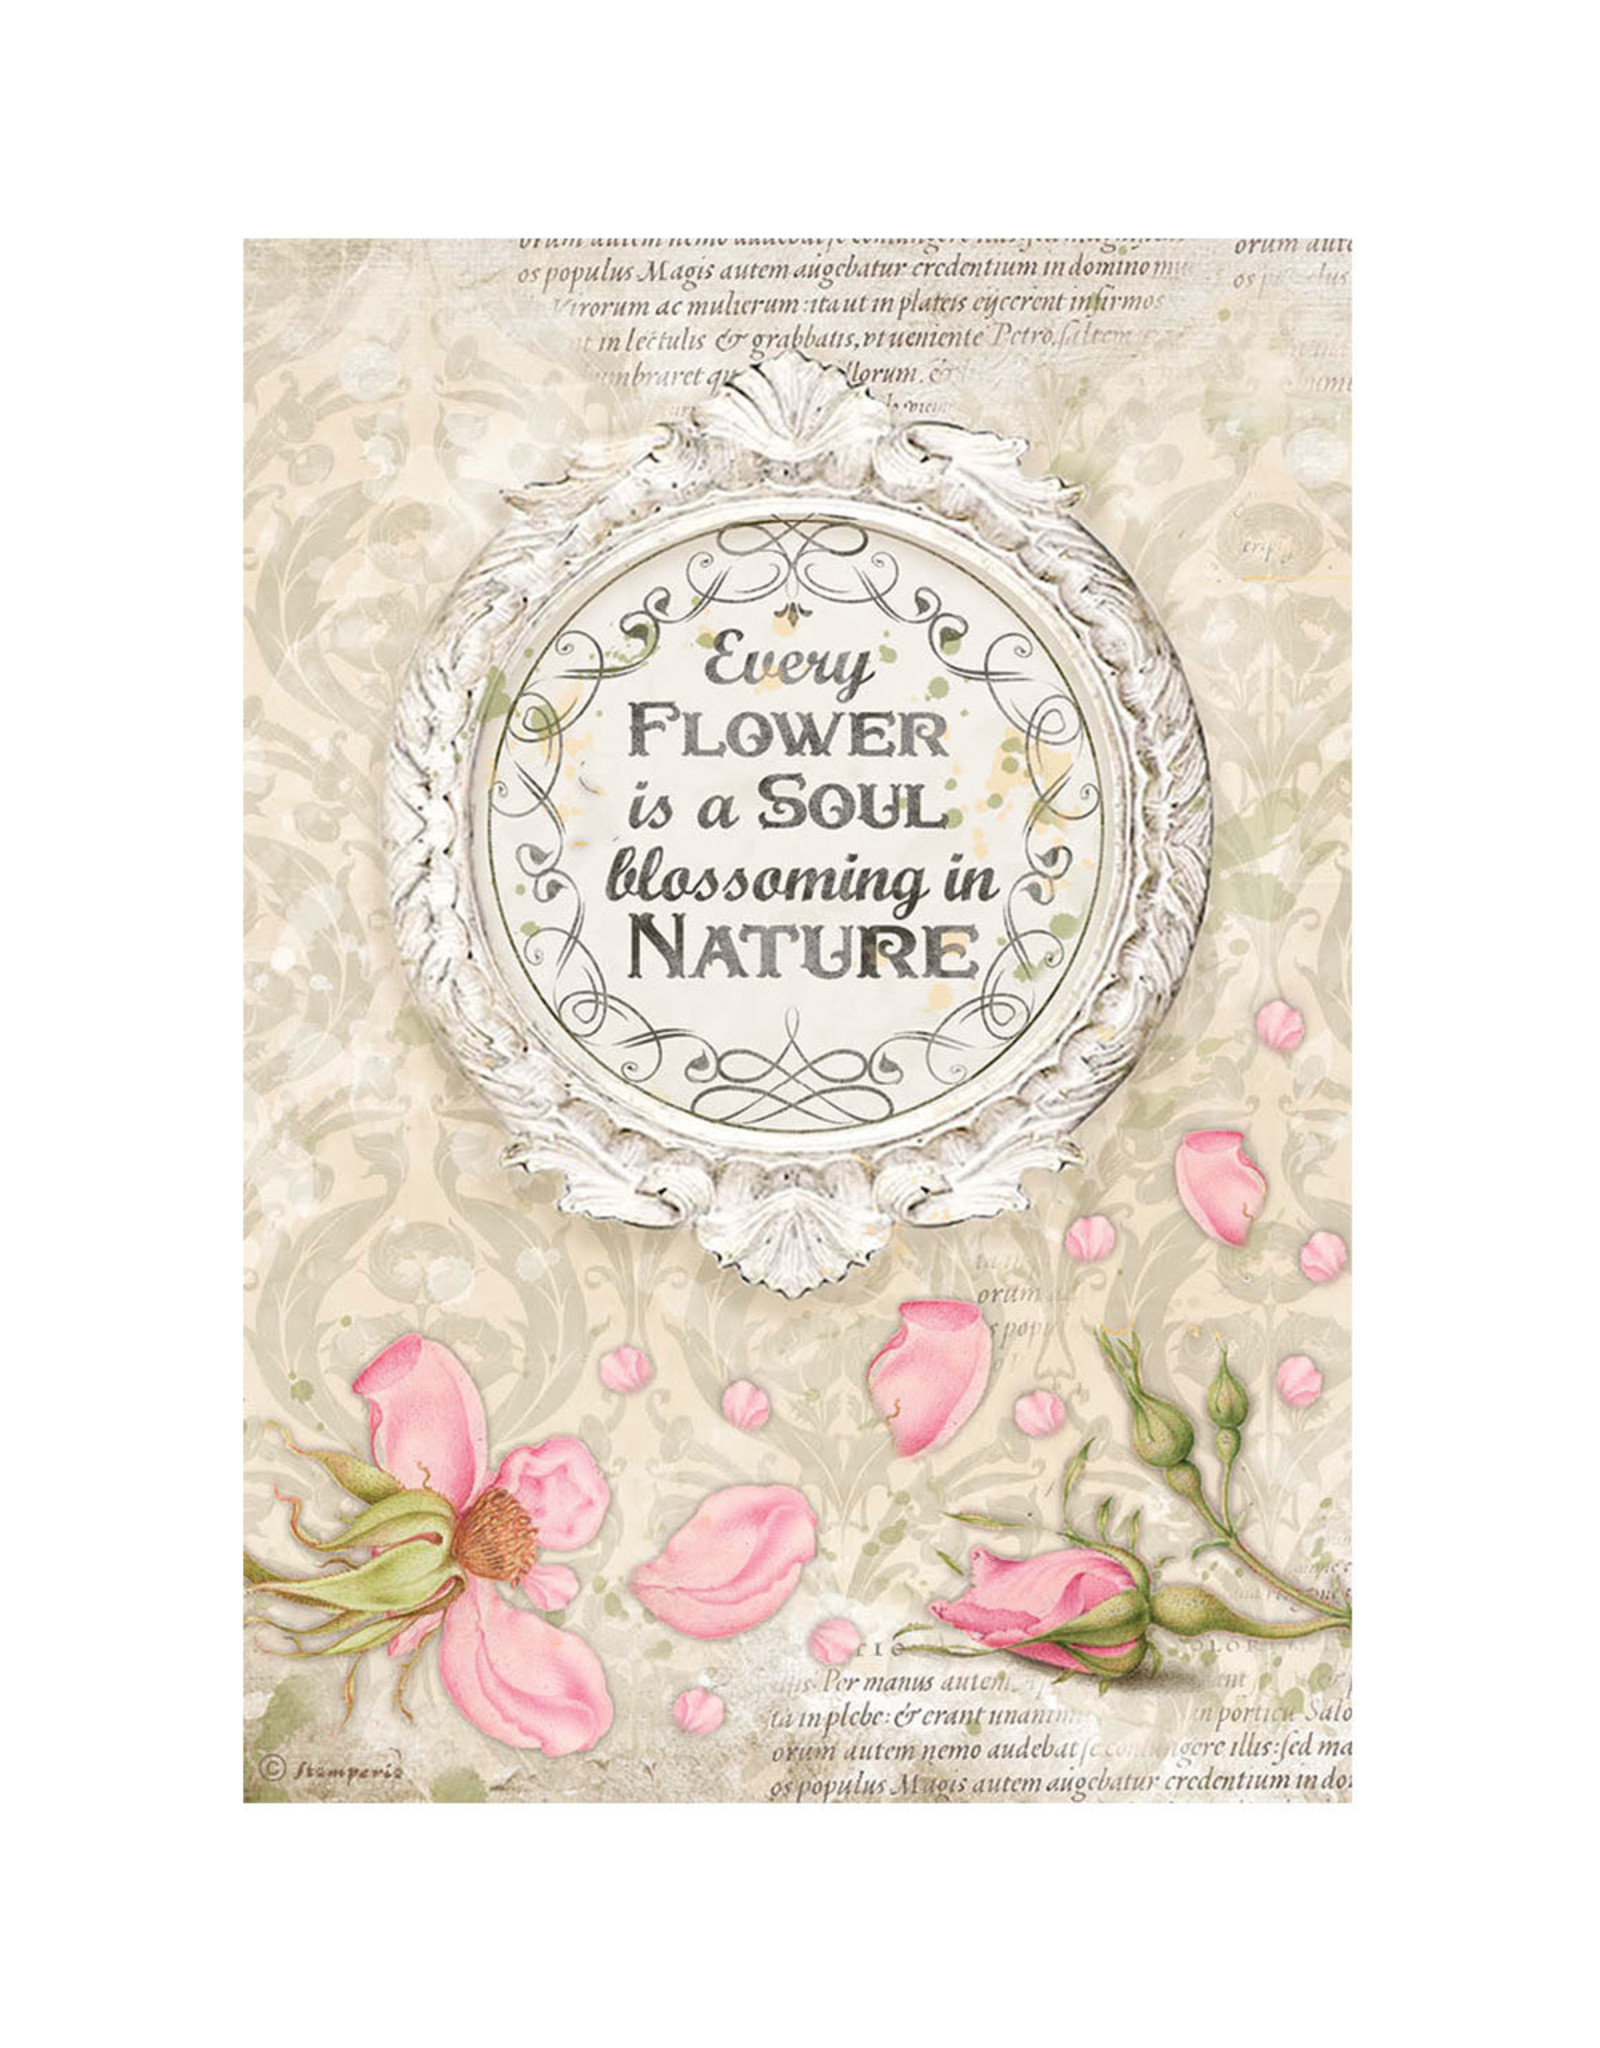 STAMPERIA STAMPERIA ROMANTIC COLLECTION GARDEN HOUSE FRAME WITH QUOTE RICE PAPER DECOUPAGE 21X29.7CM